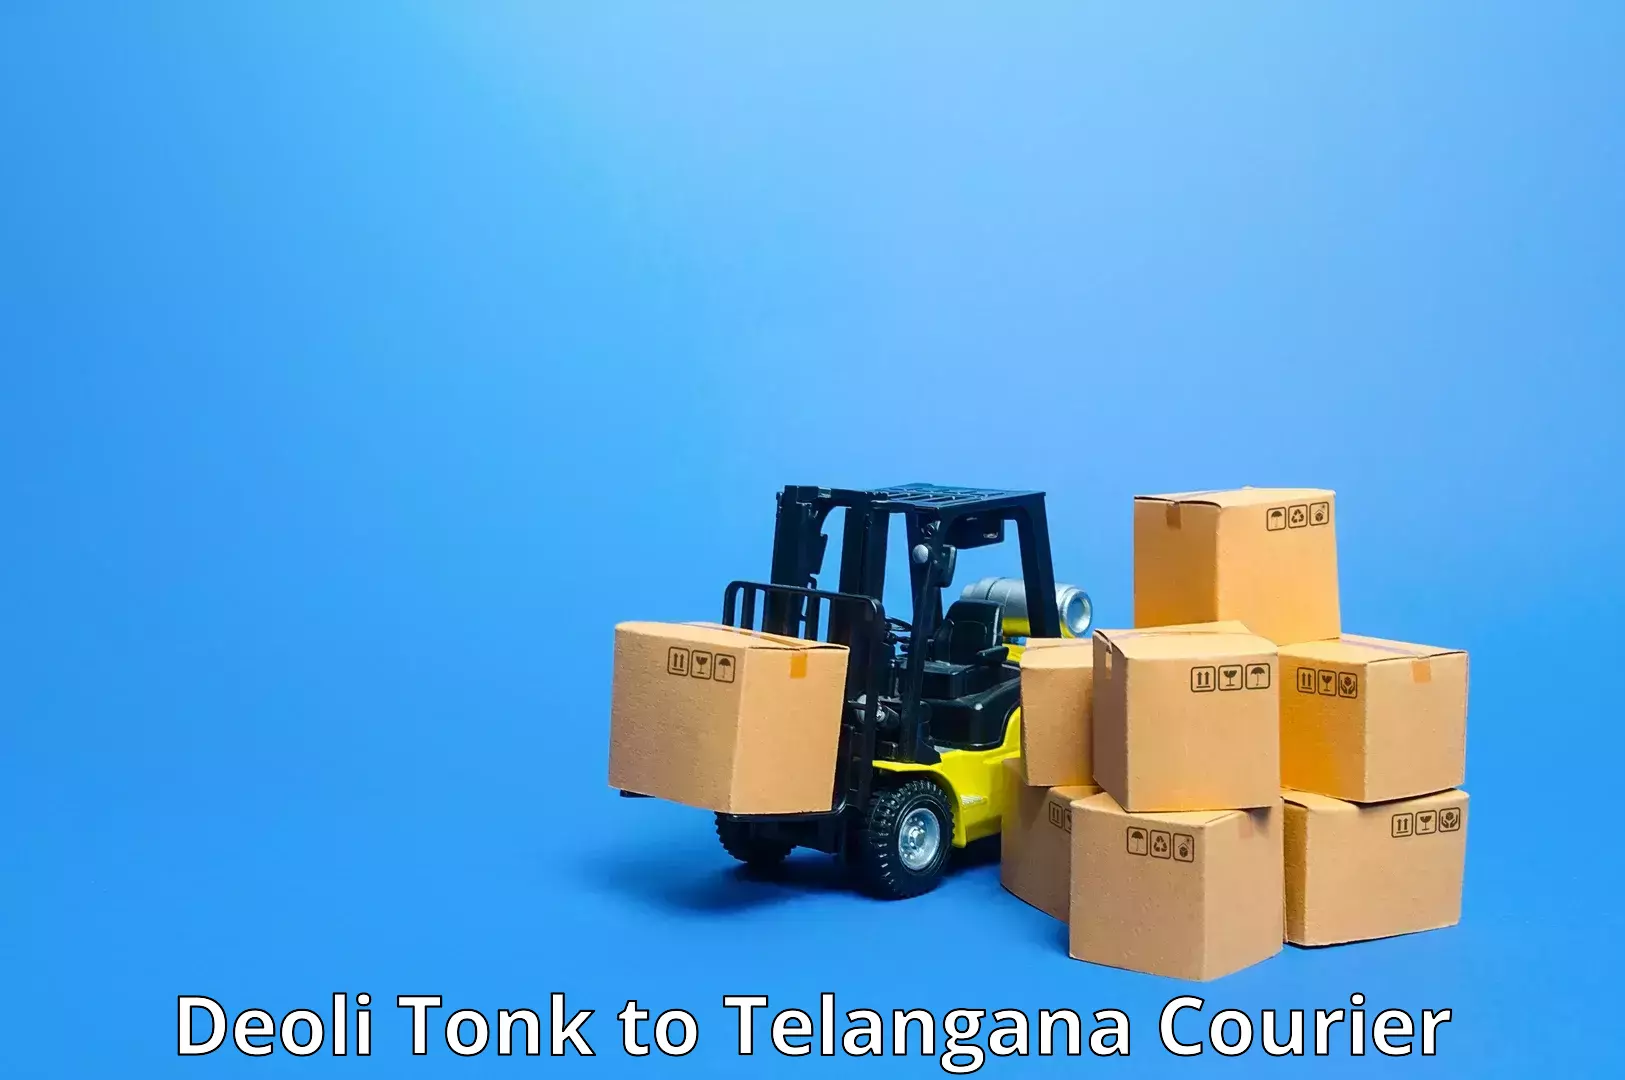 Modern parcel services Deoli Tonk to Bhainsa